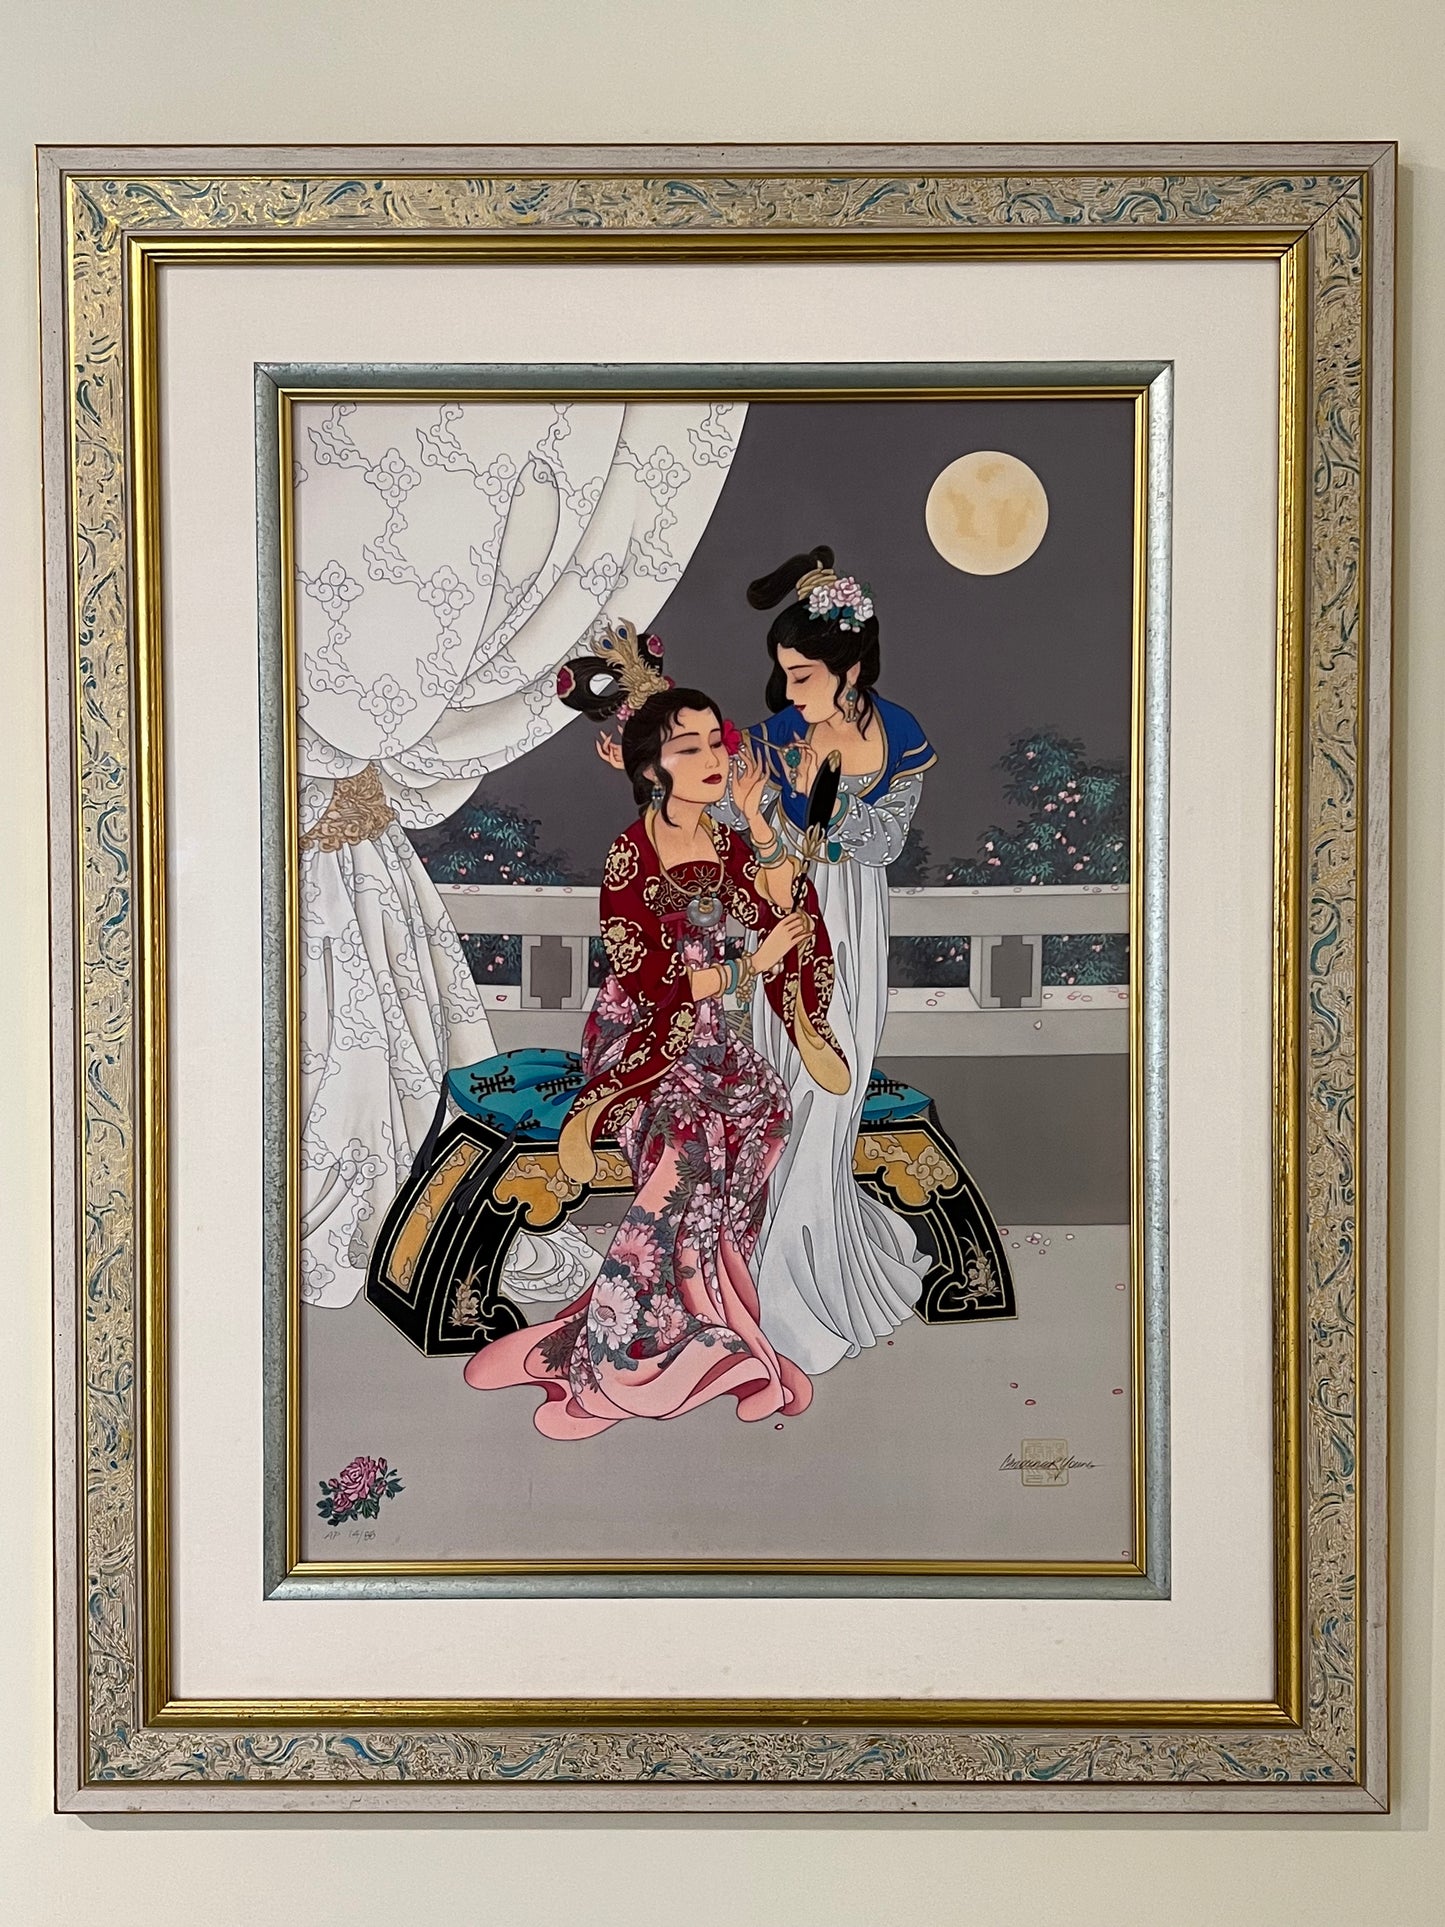 Caroline Young Framed Limited Print "Sisters of the Red Chamber" 31"x25"